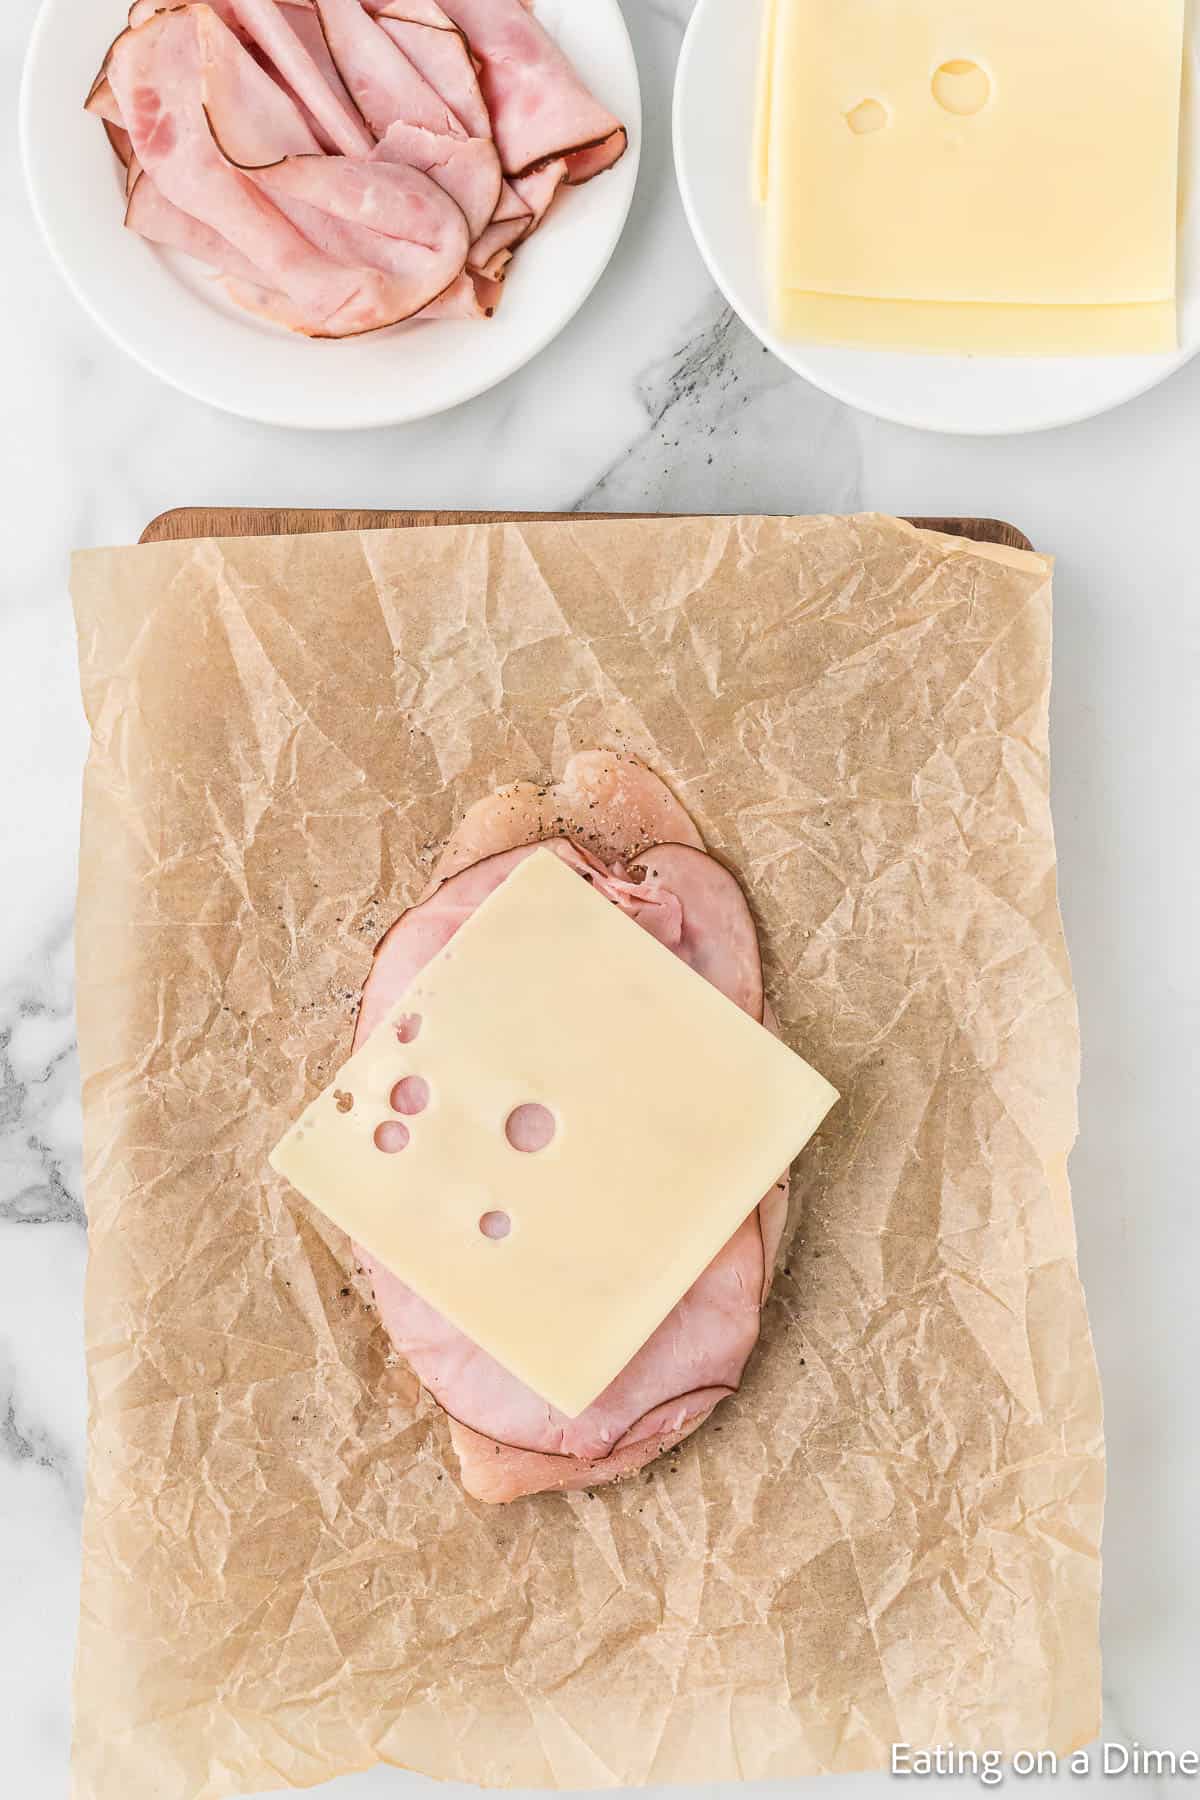 Topping the chicken breast with ham and slice cheese with a plate of ham and slice cheese on the side